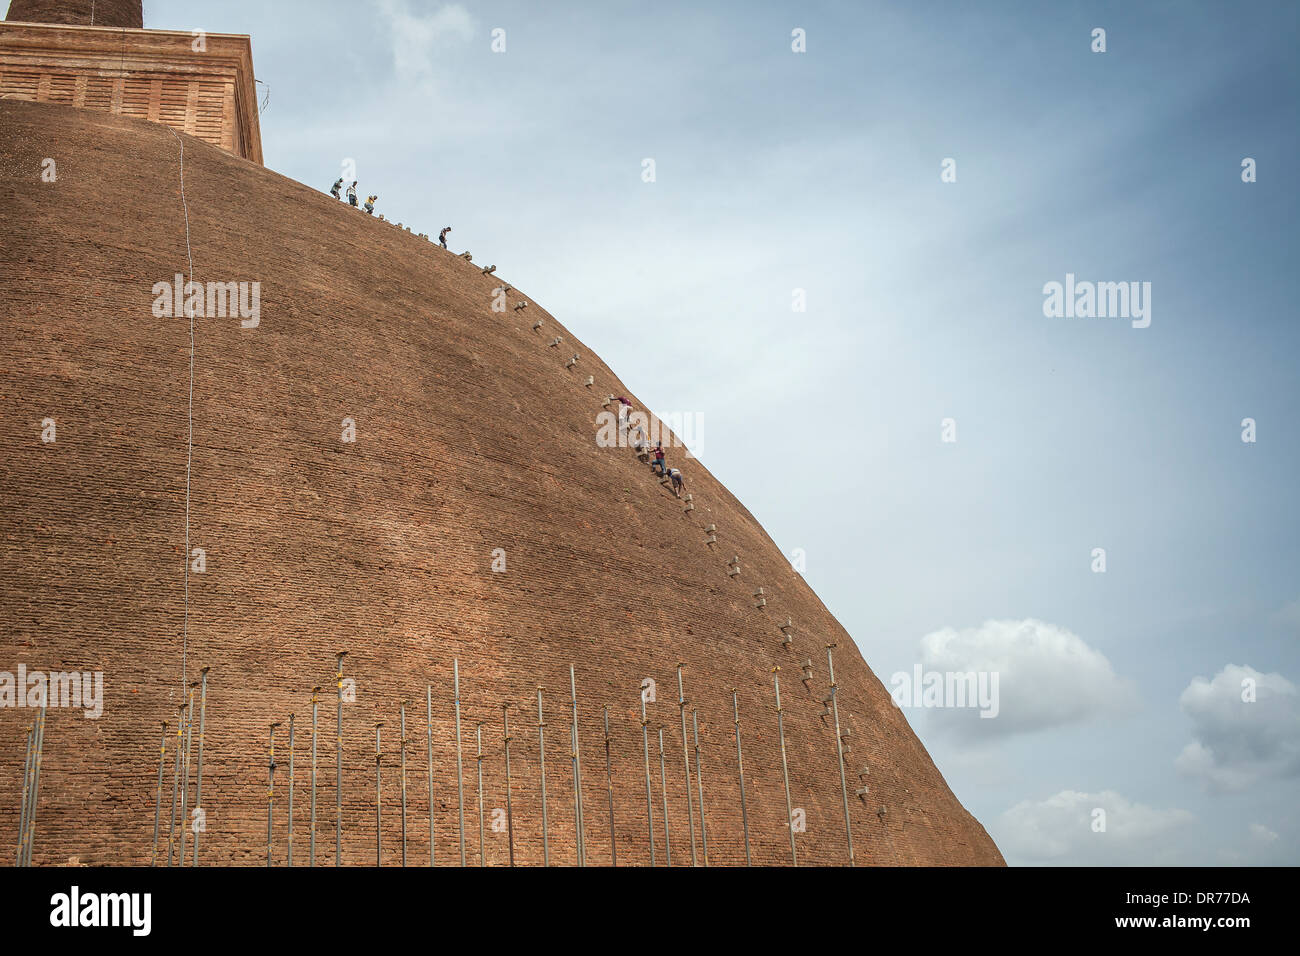 Workers descending a temple in Anuradhapura, Sri Lank during restoration work Stock Photo